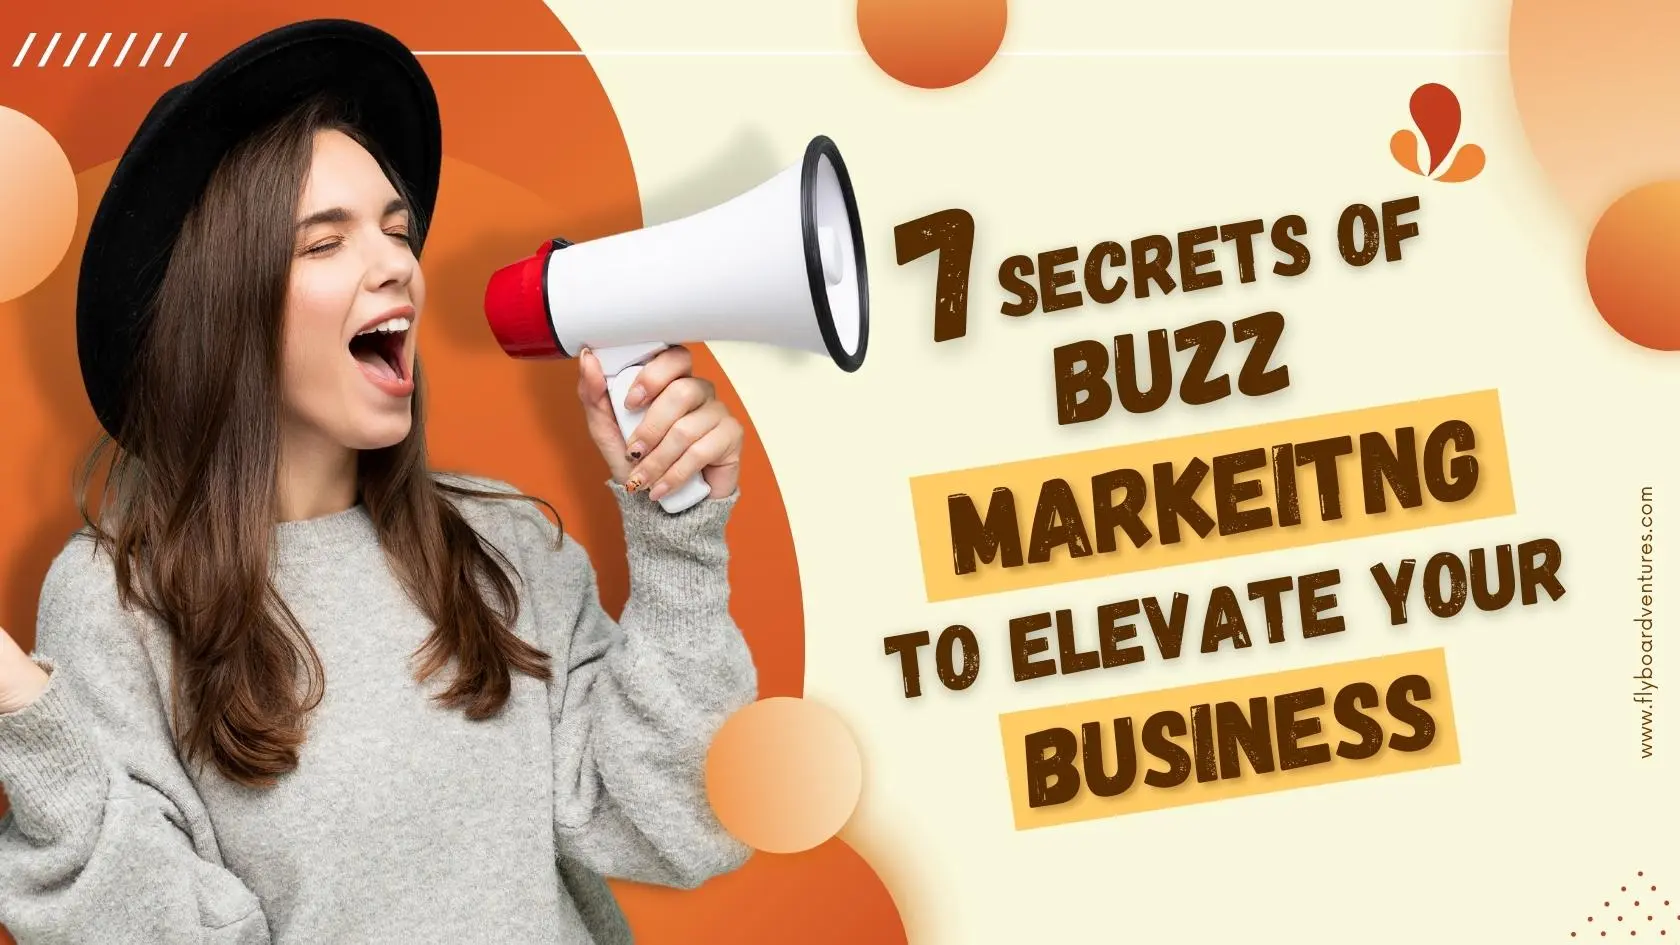 7 Secrets Of Buzz Marketing To Elevate Your Brand